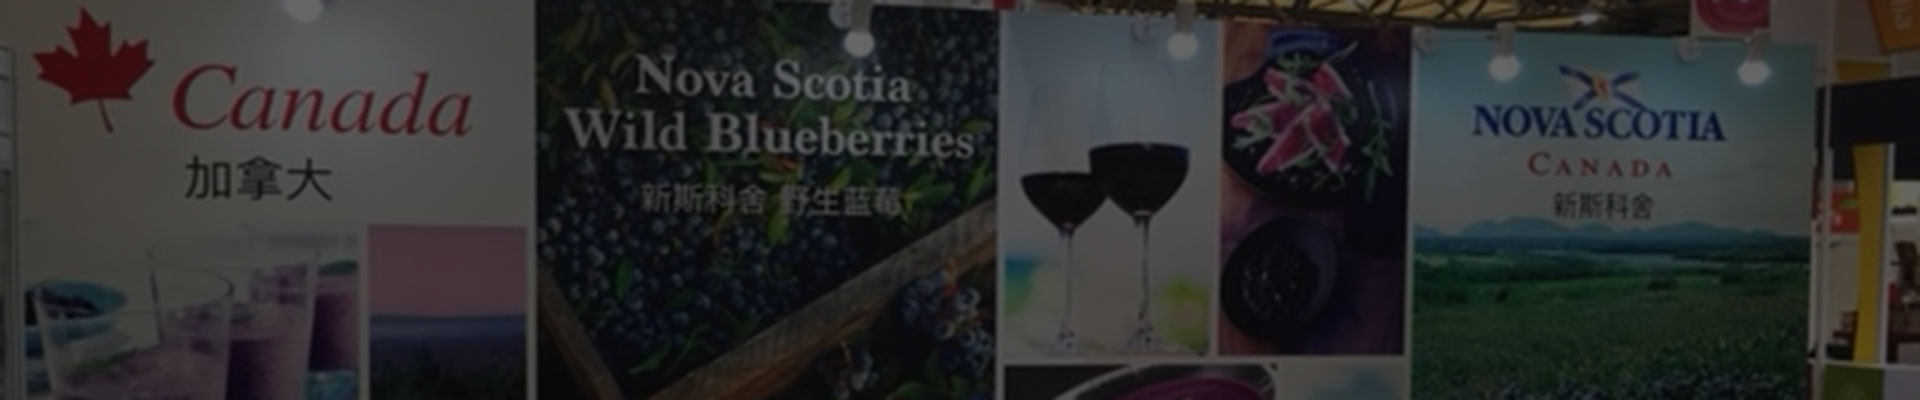 Wild Blueberry trade show booth display in Shanghai, China